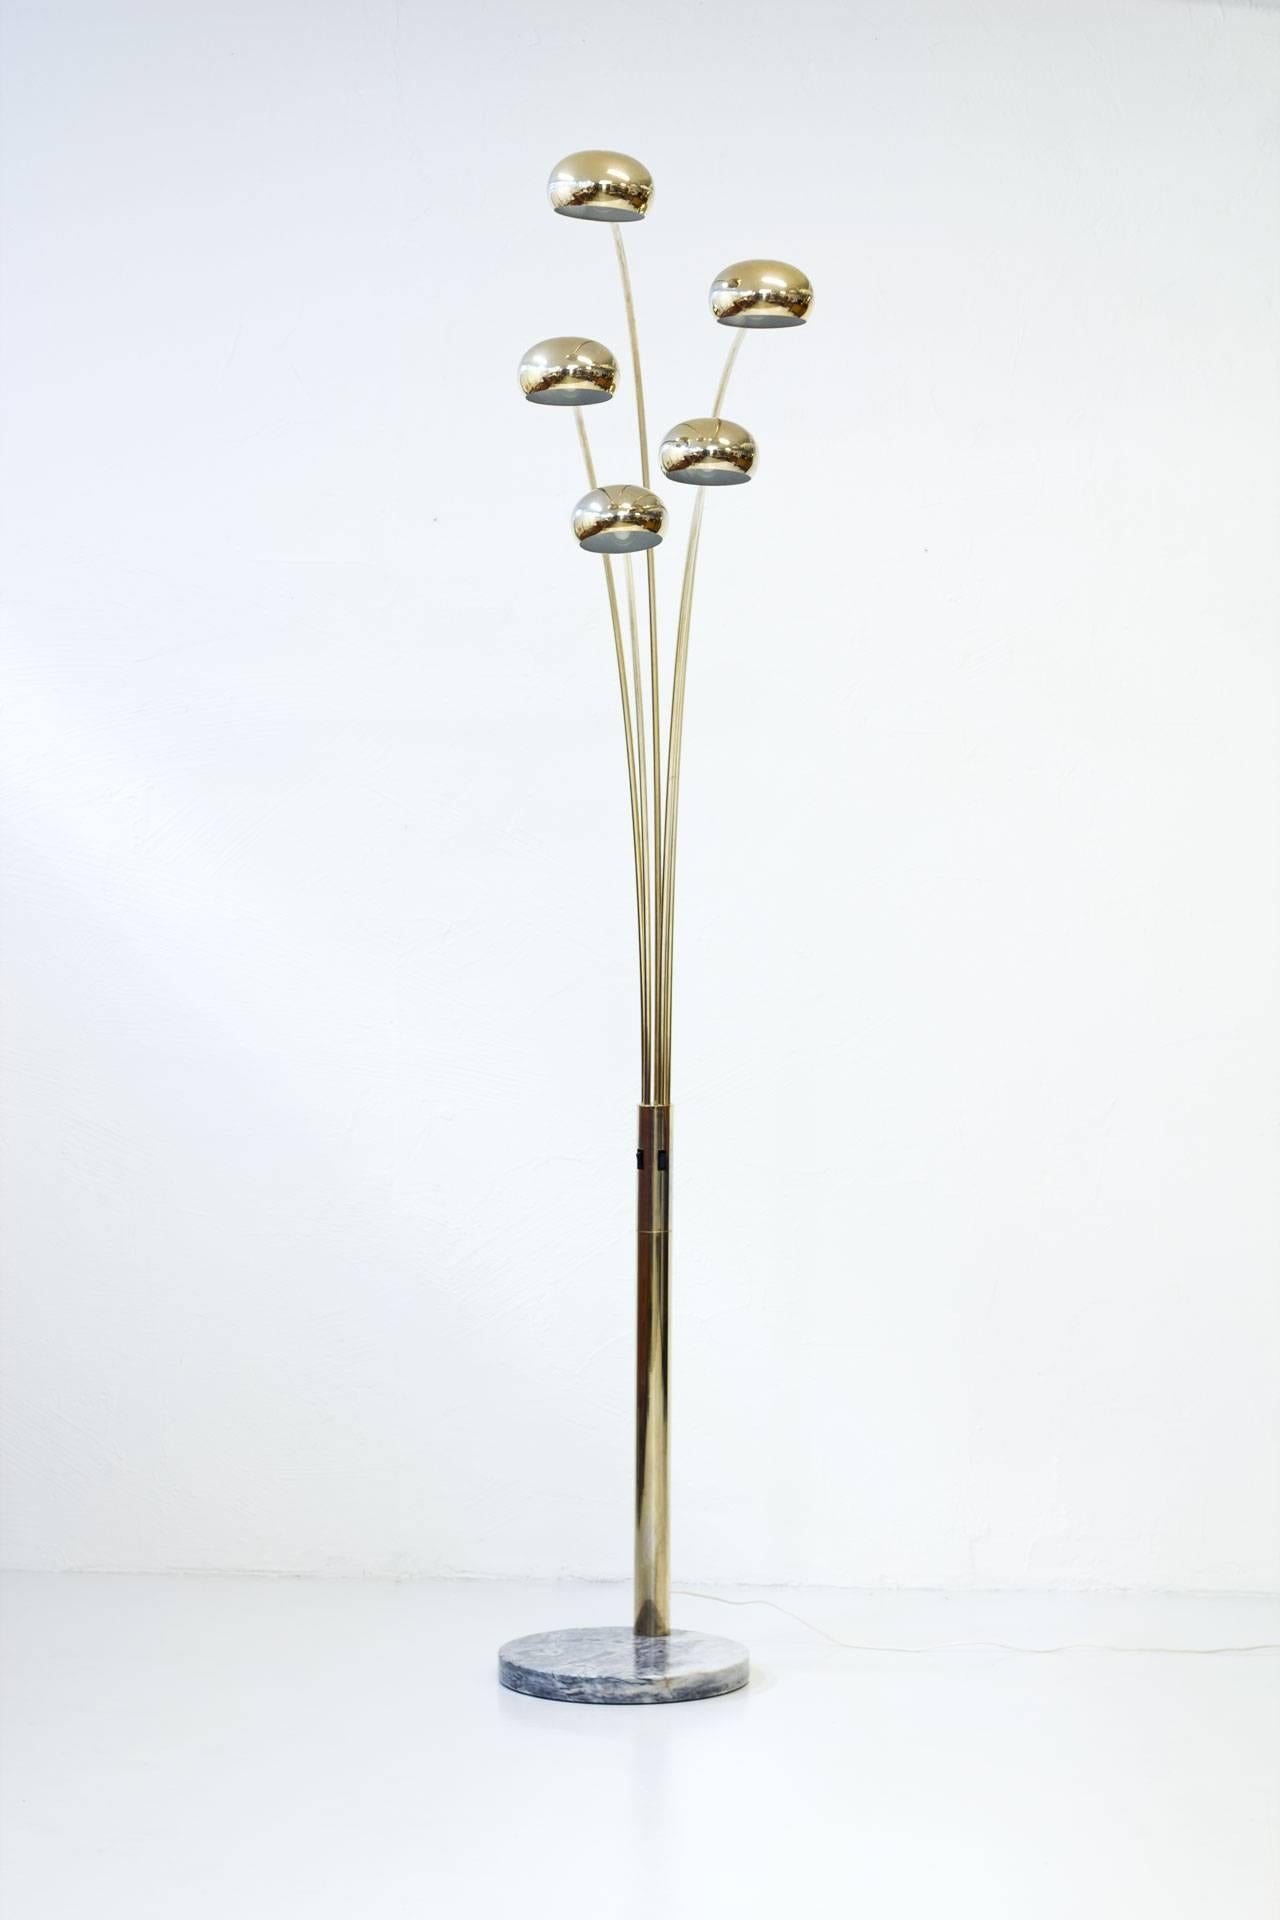 Five-armed floor lamp produced by Lamp Gustav in Sweden during the 1970s.
Stainless steel lacquered gold. Adjustable arms and reflectors. Marble base.
Two switches on stem. Lighting option two, three or five.
 